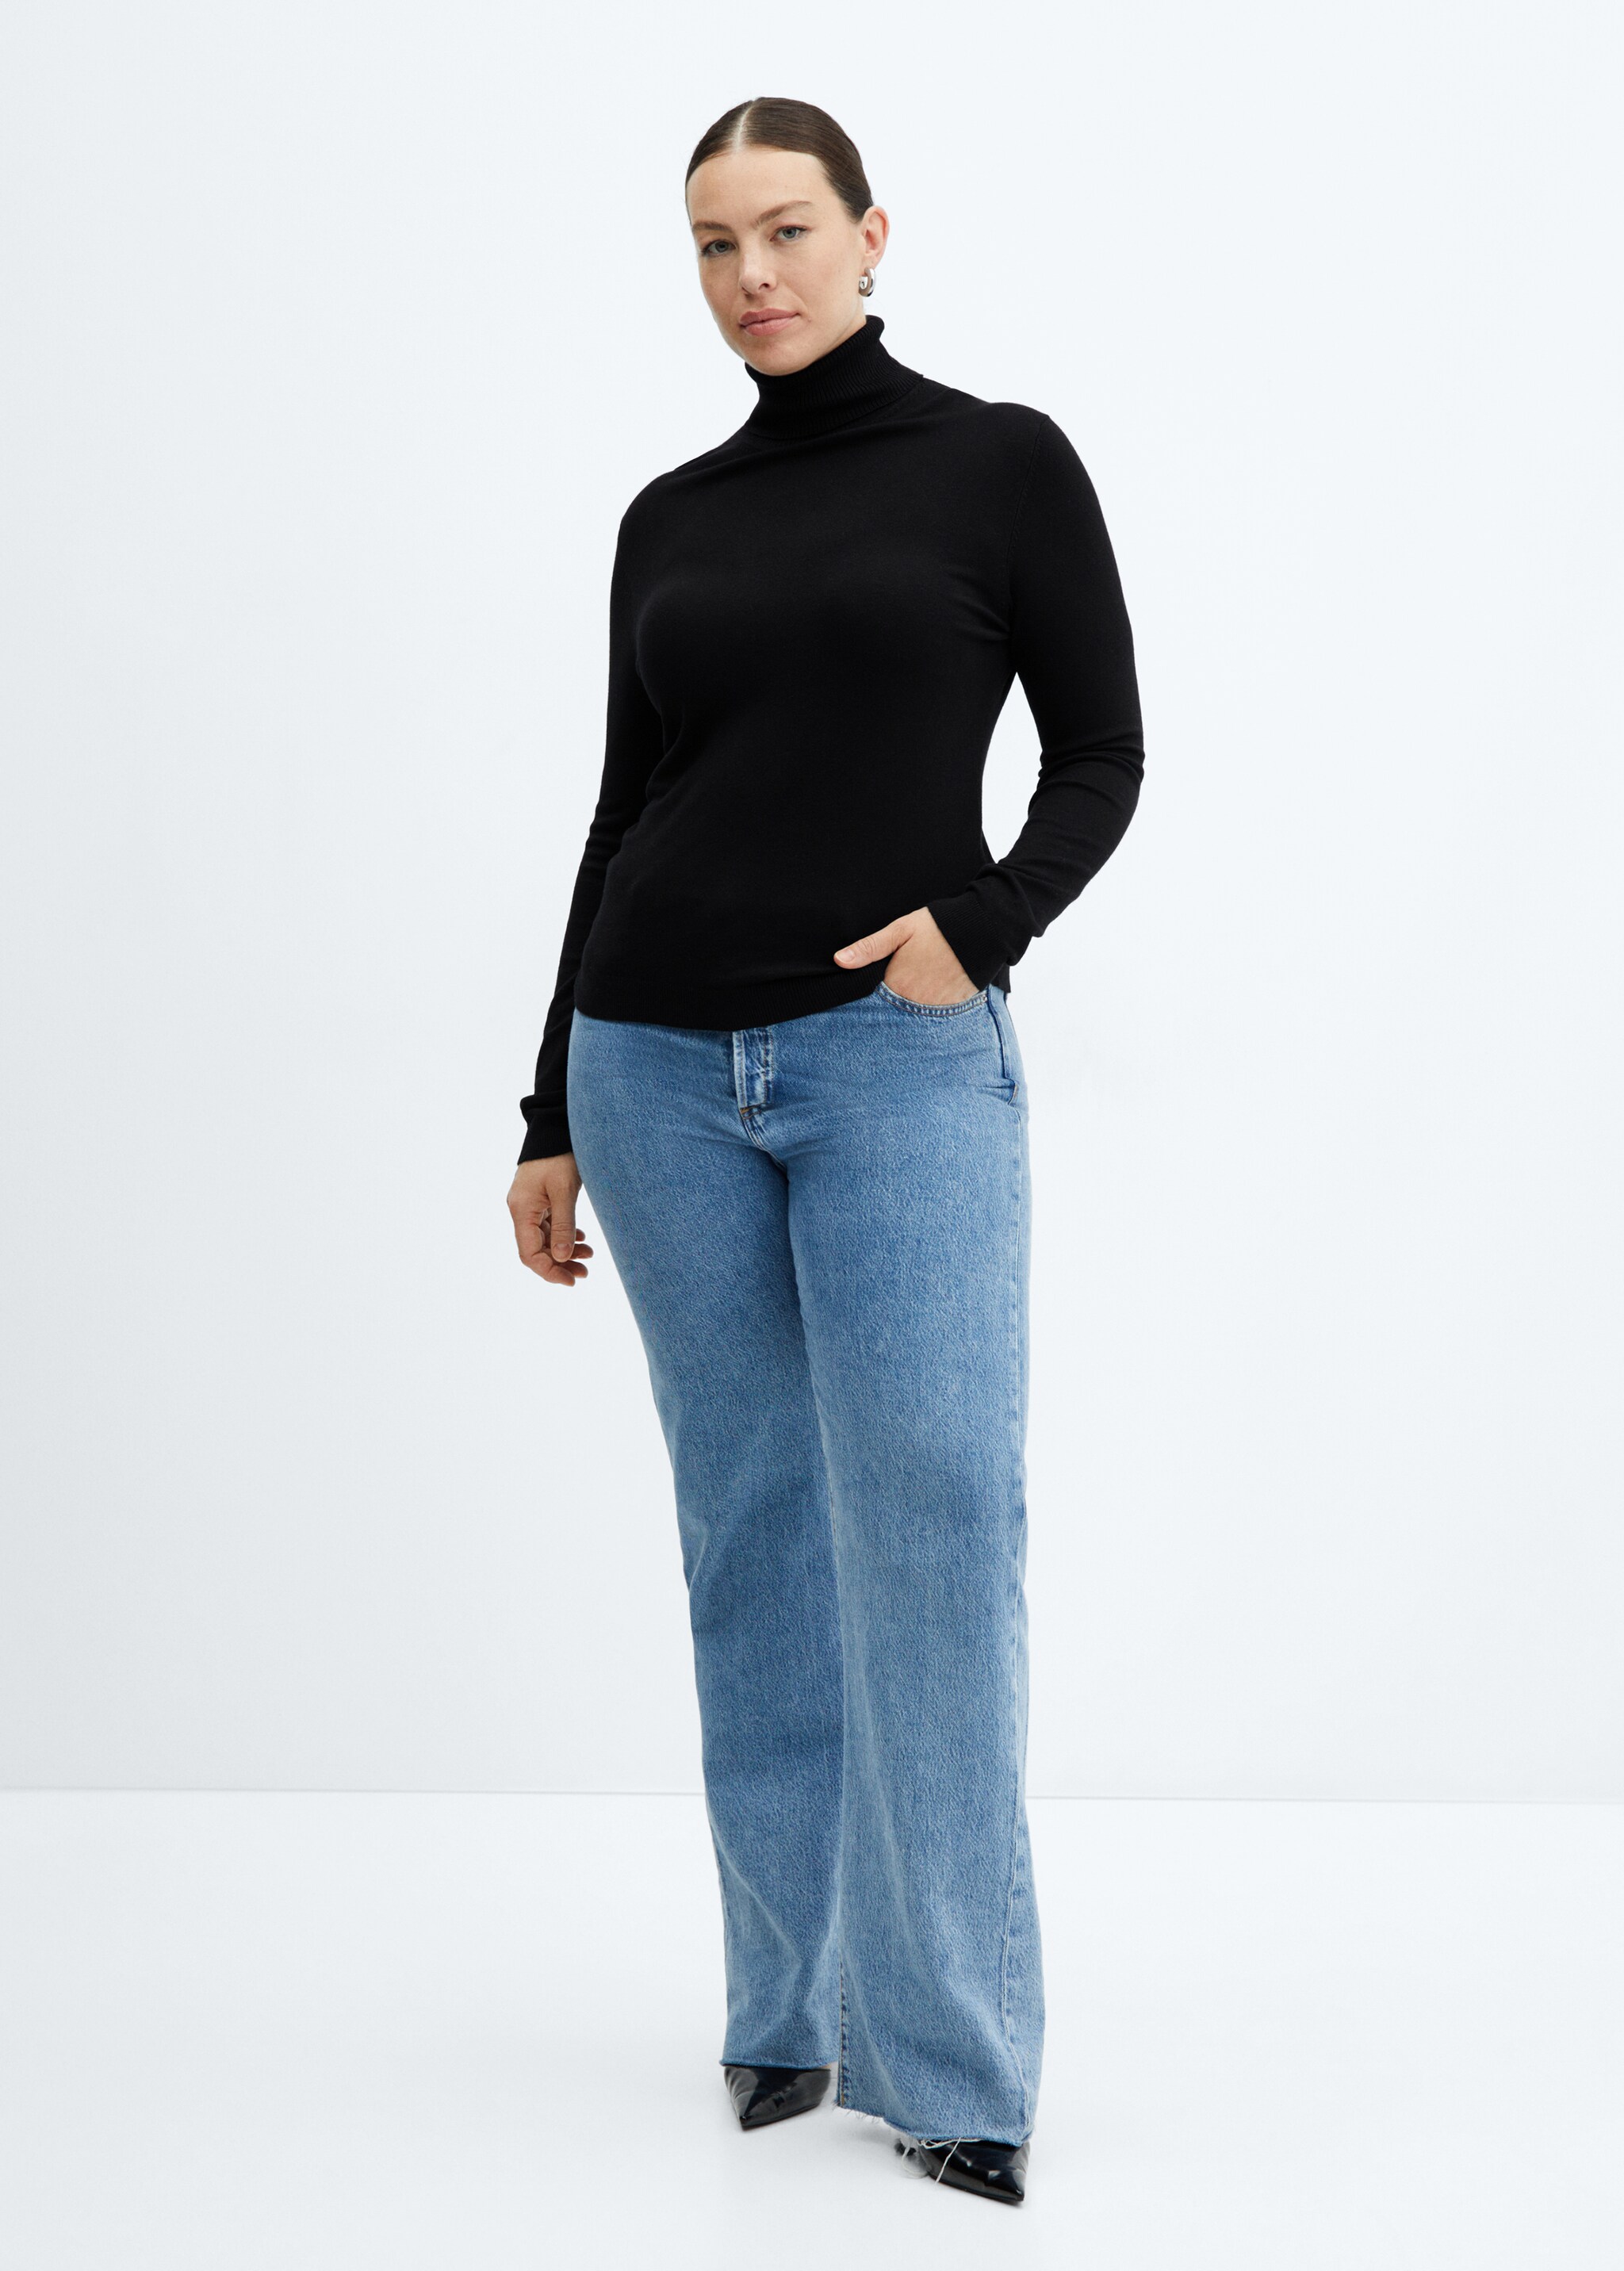 Fine-knit turtleneck sweater - Details of the article 3